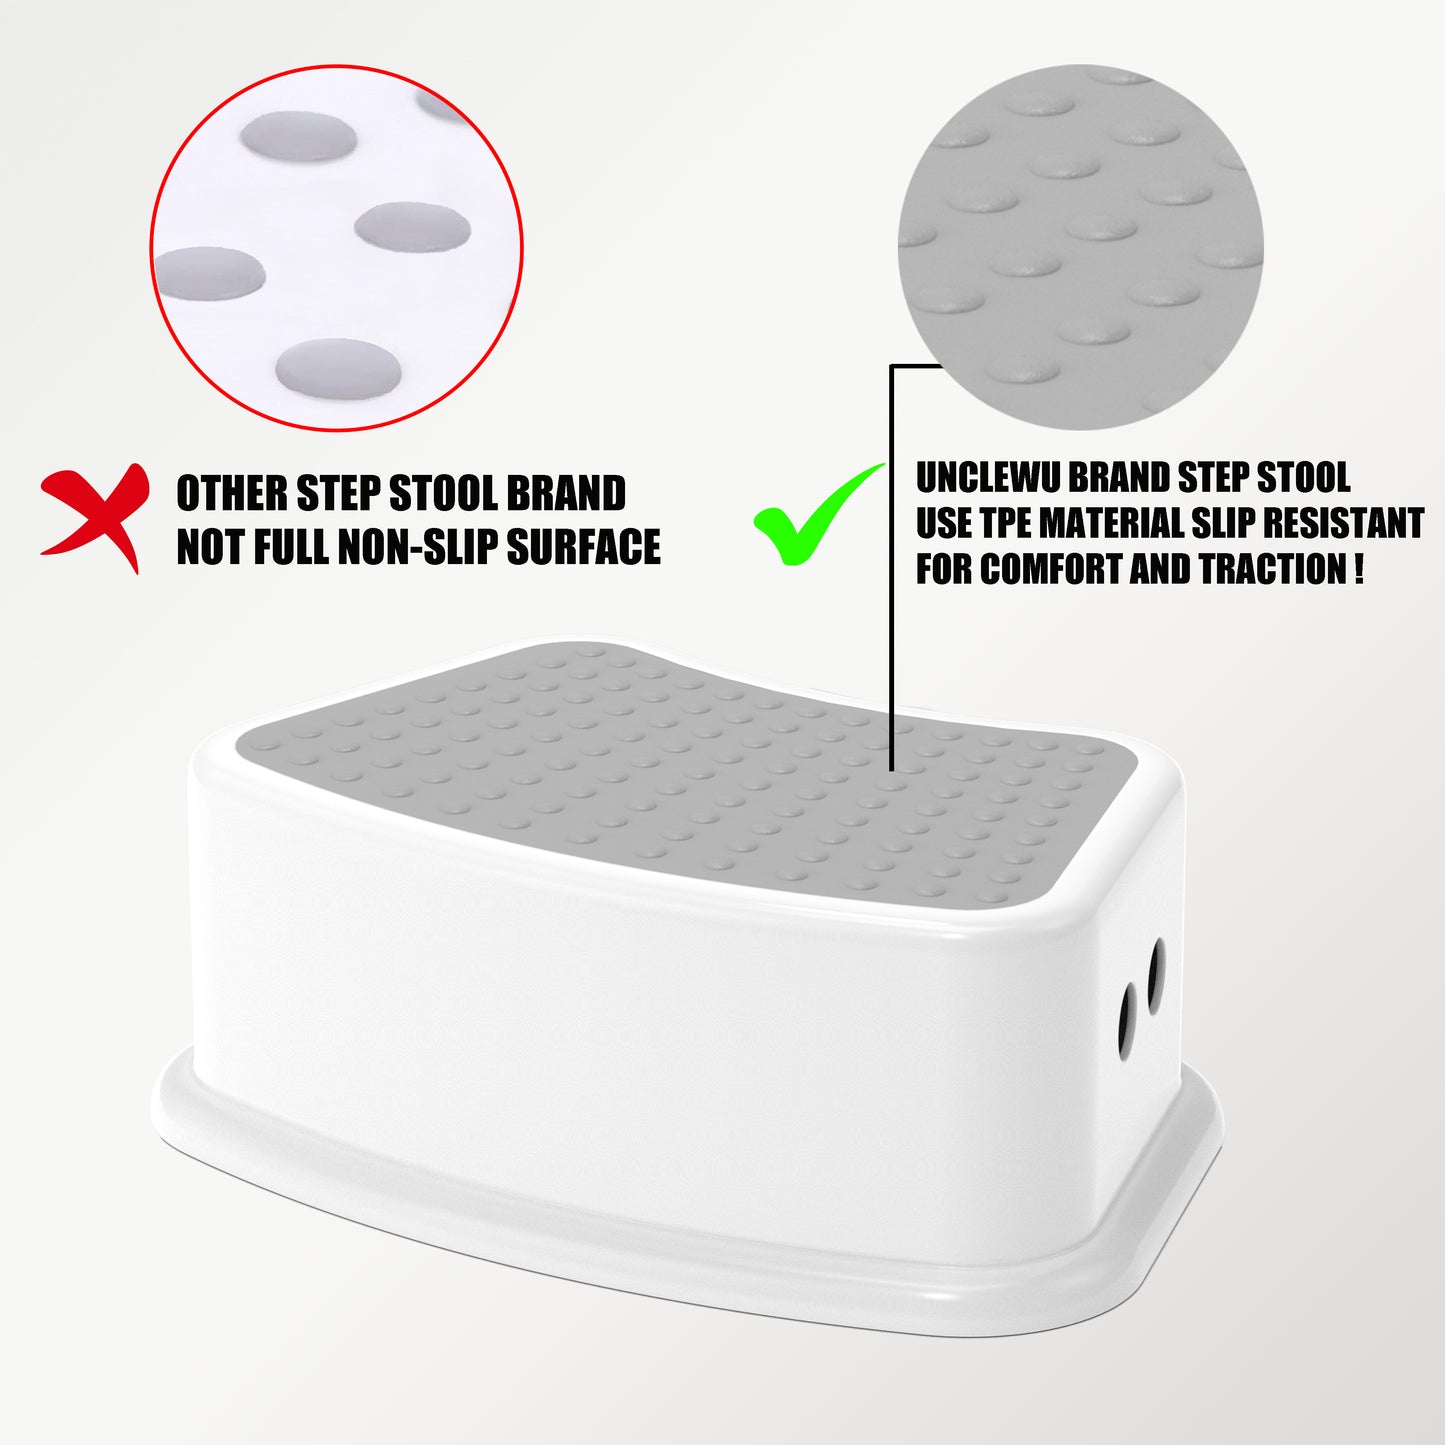 Step Stool for Kids - Toddler Step Up Stool for Kitchen - Bathroom Safety Bottom as Toilet Stool - Slip-Resistant Surface1 Step Stool for Kids / Adult (Gray White) 1 Pack